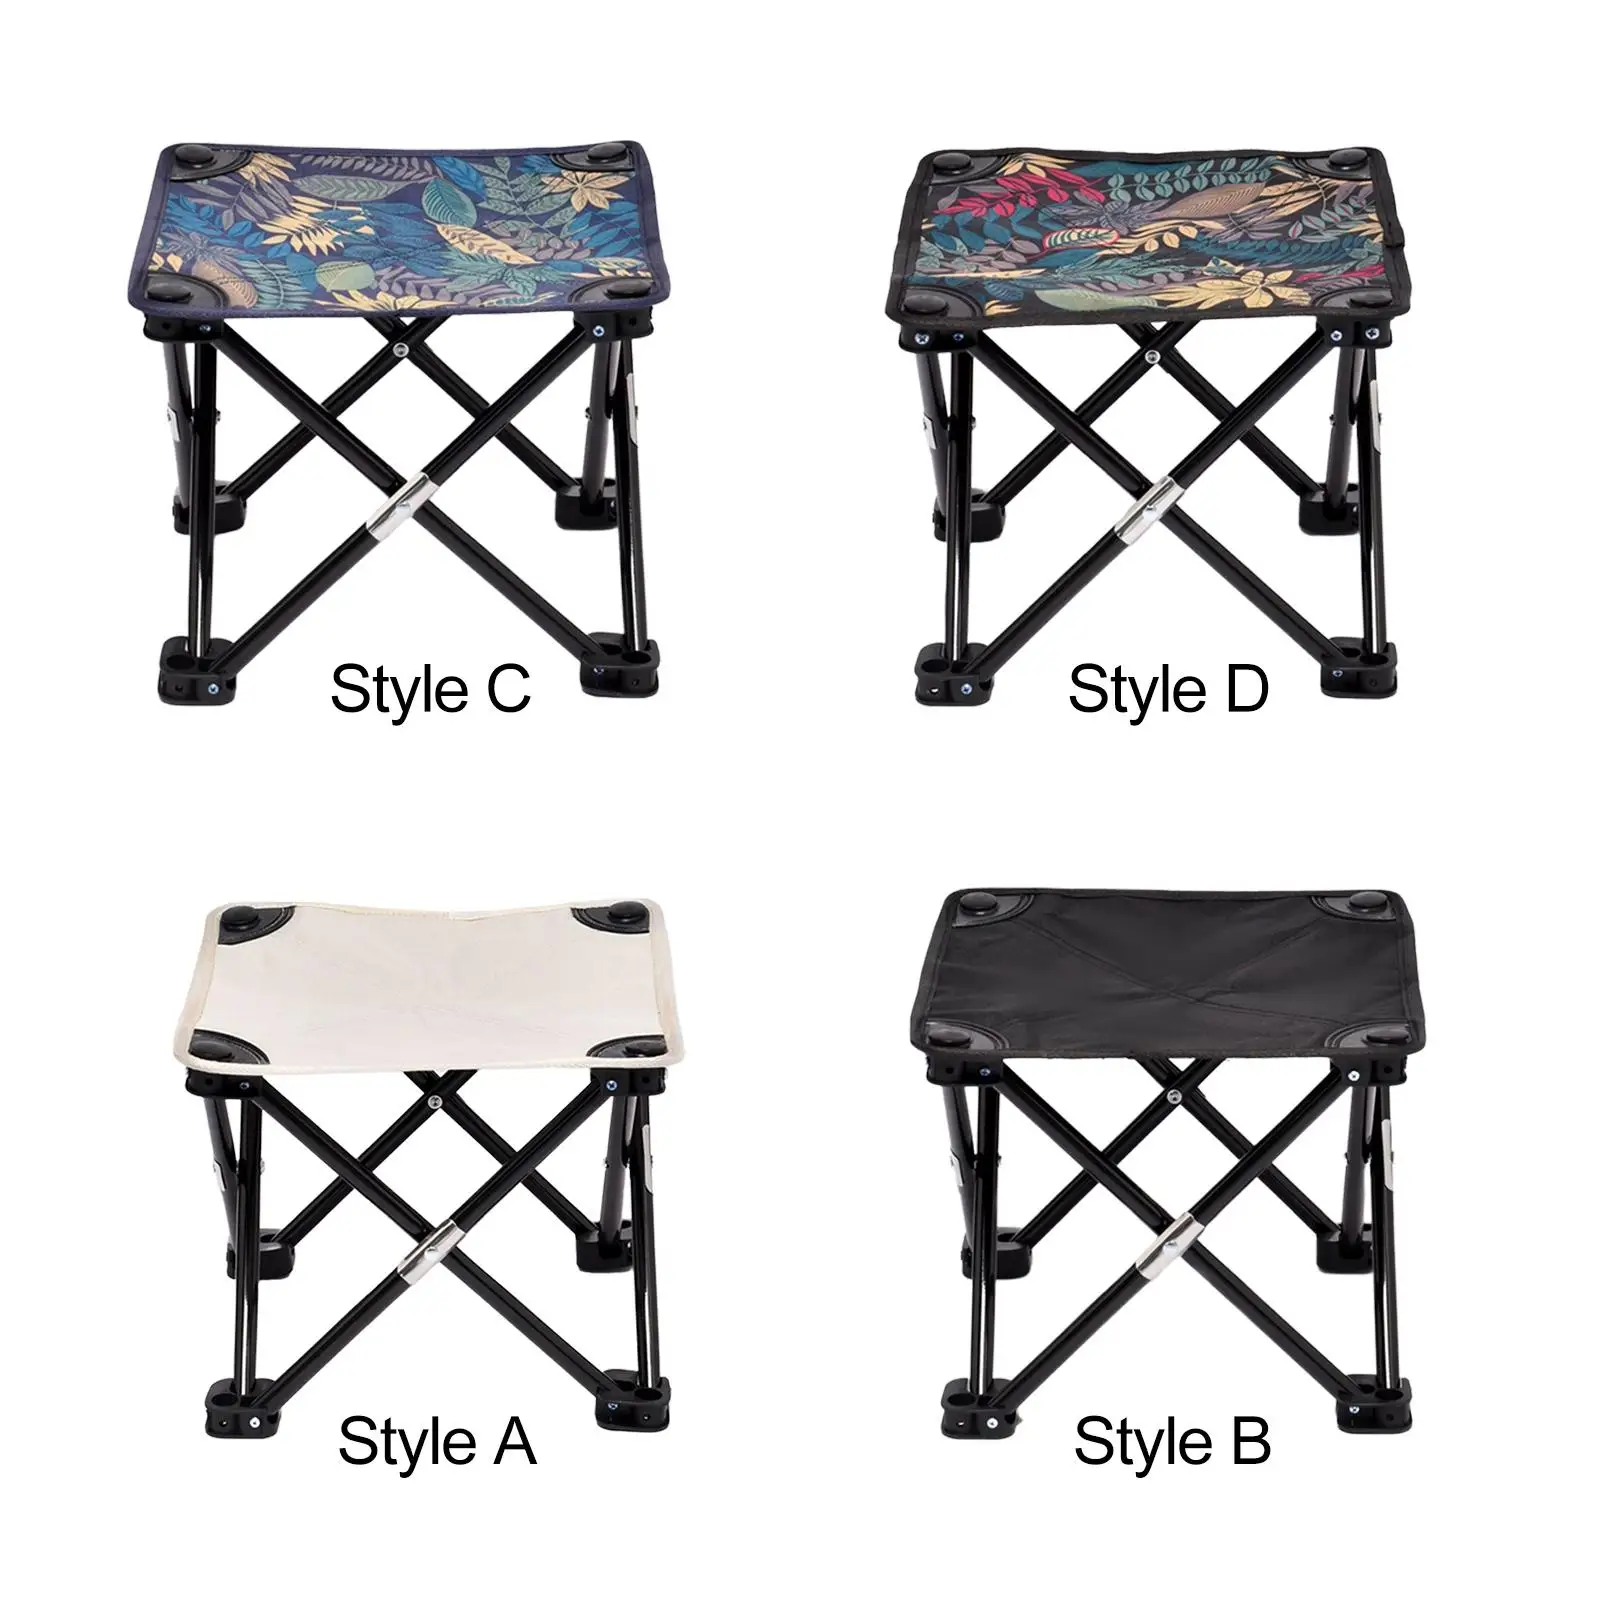 Folding Stools Reusable Chair Ottoman Wear Resistant Camping Chair Foot Stool for Picnic Walking Hiking Traveling Backpacking